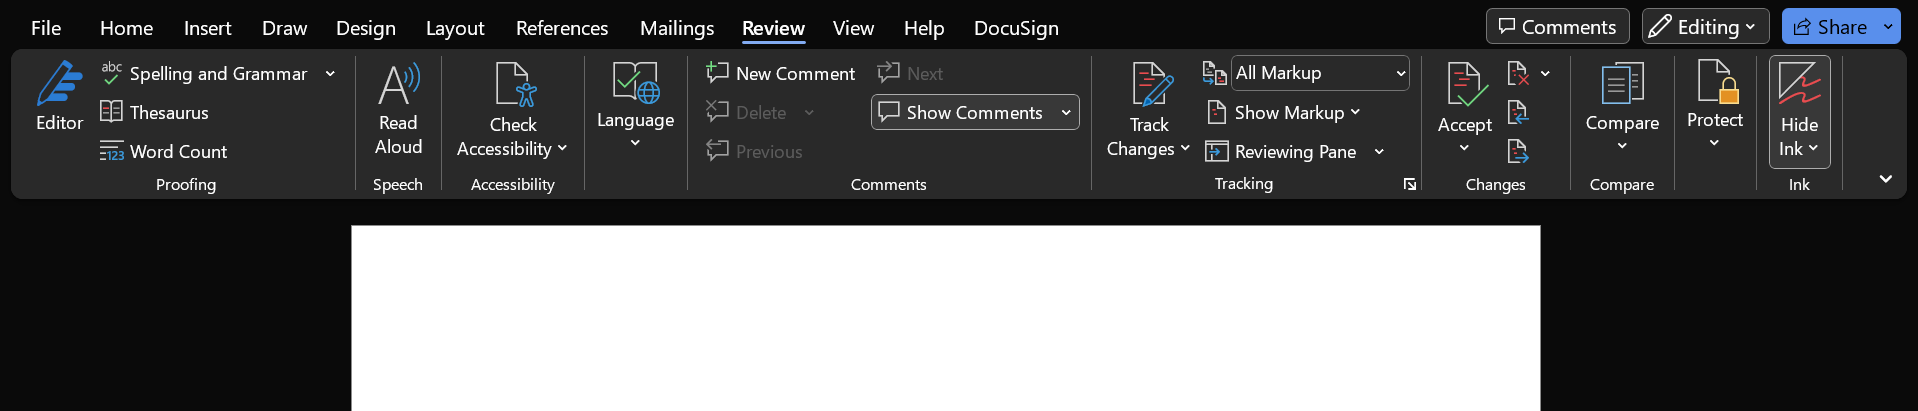 Microsoft Word Review Tab with the Hide Ink button highlighted at the end of the row